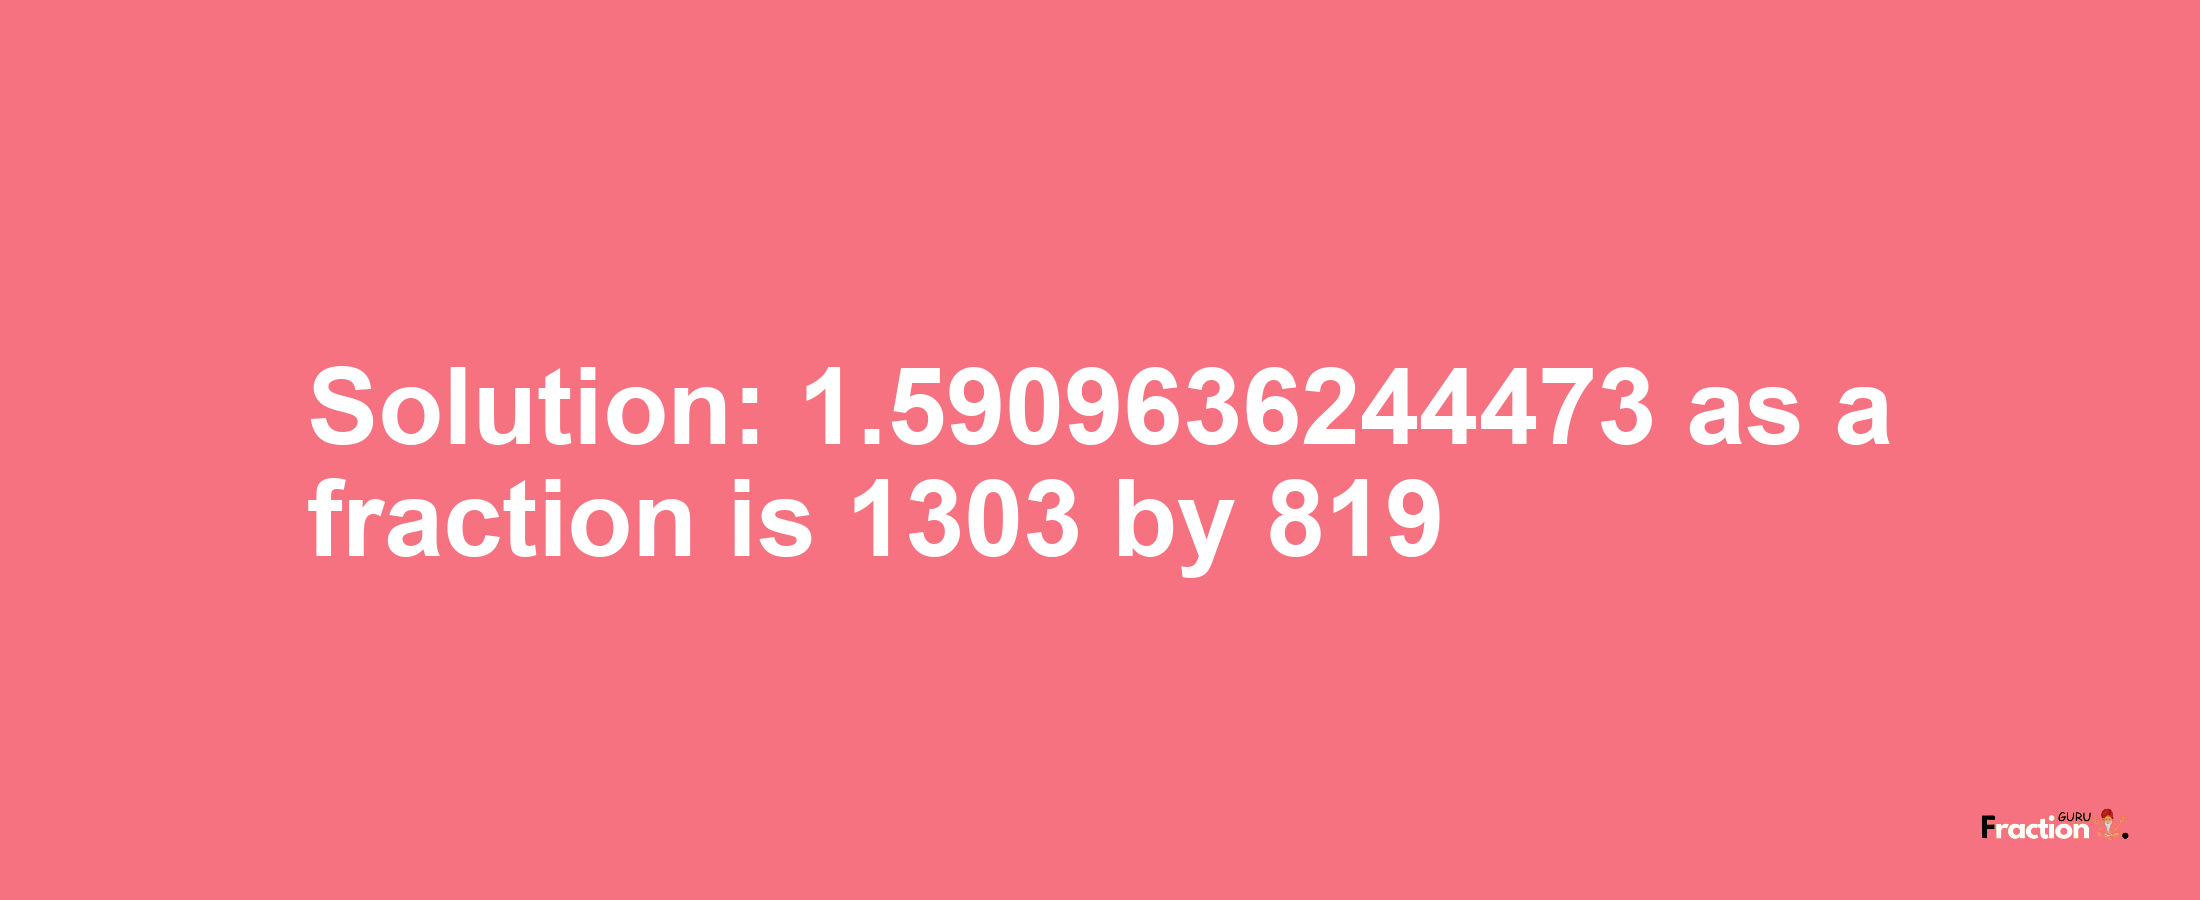 Solution:1.5909636244473 as a fraction is 1303/819